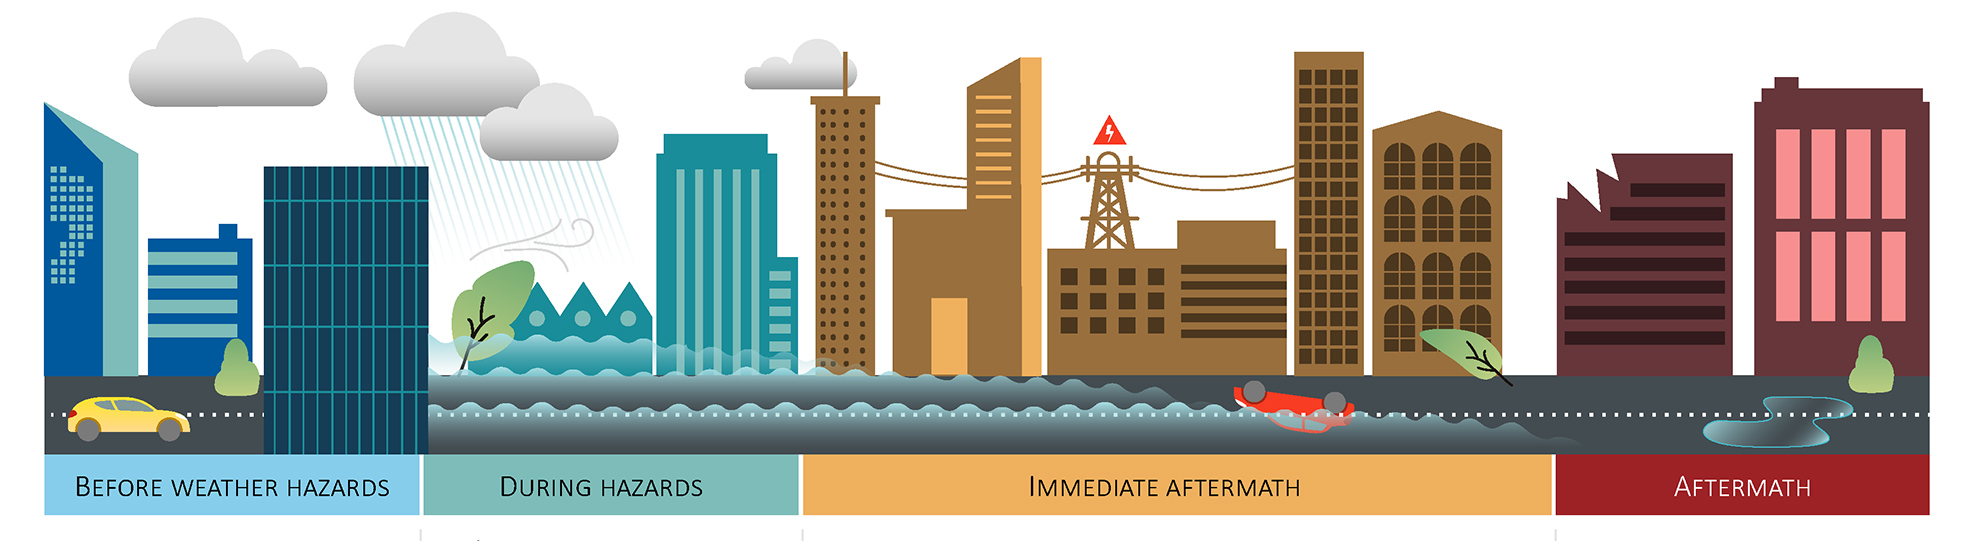 a computer-generated image of a city during four main phases of a disaster that reads "before weather hazards, during hazards, immediate aftermaths and aftermath."